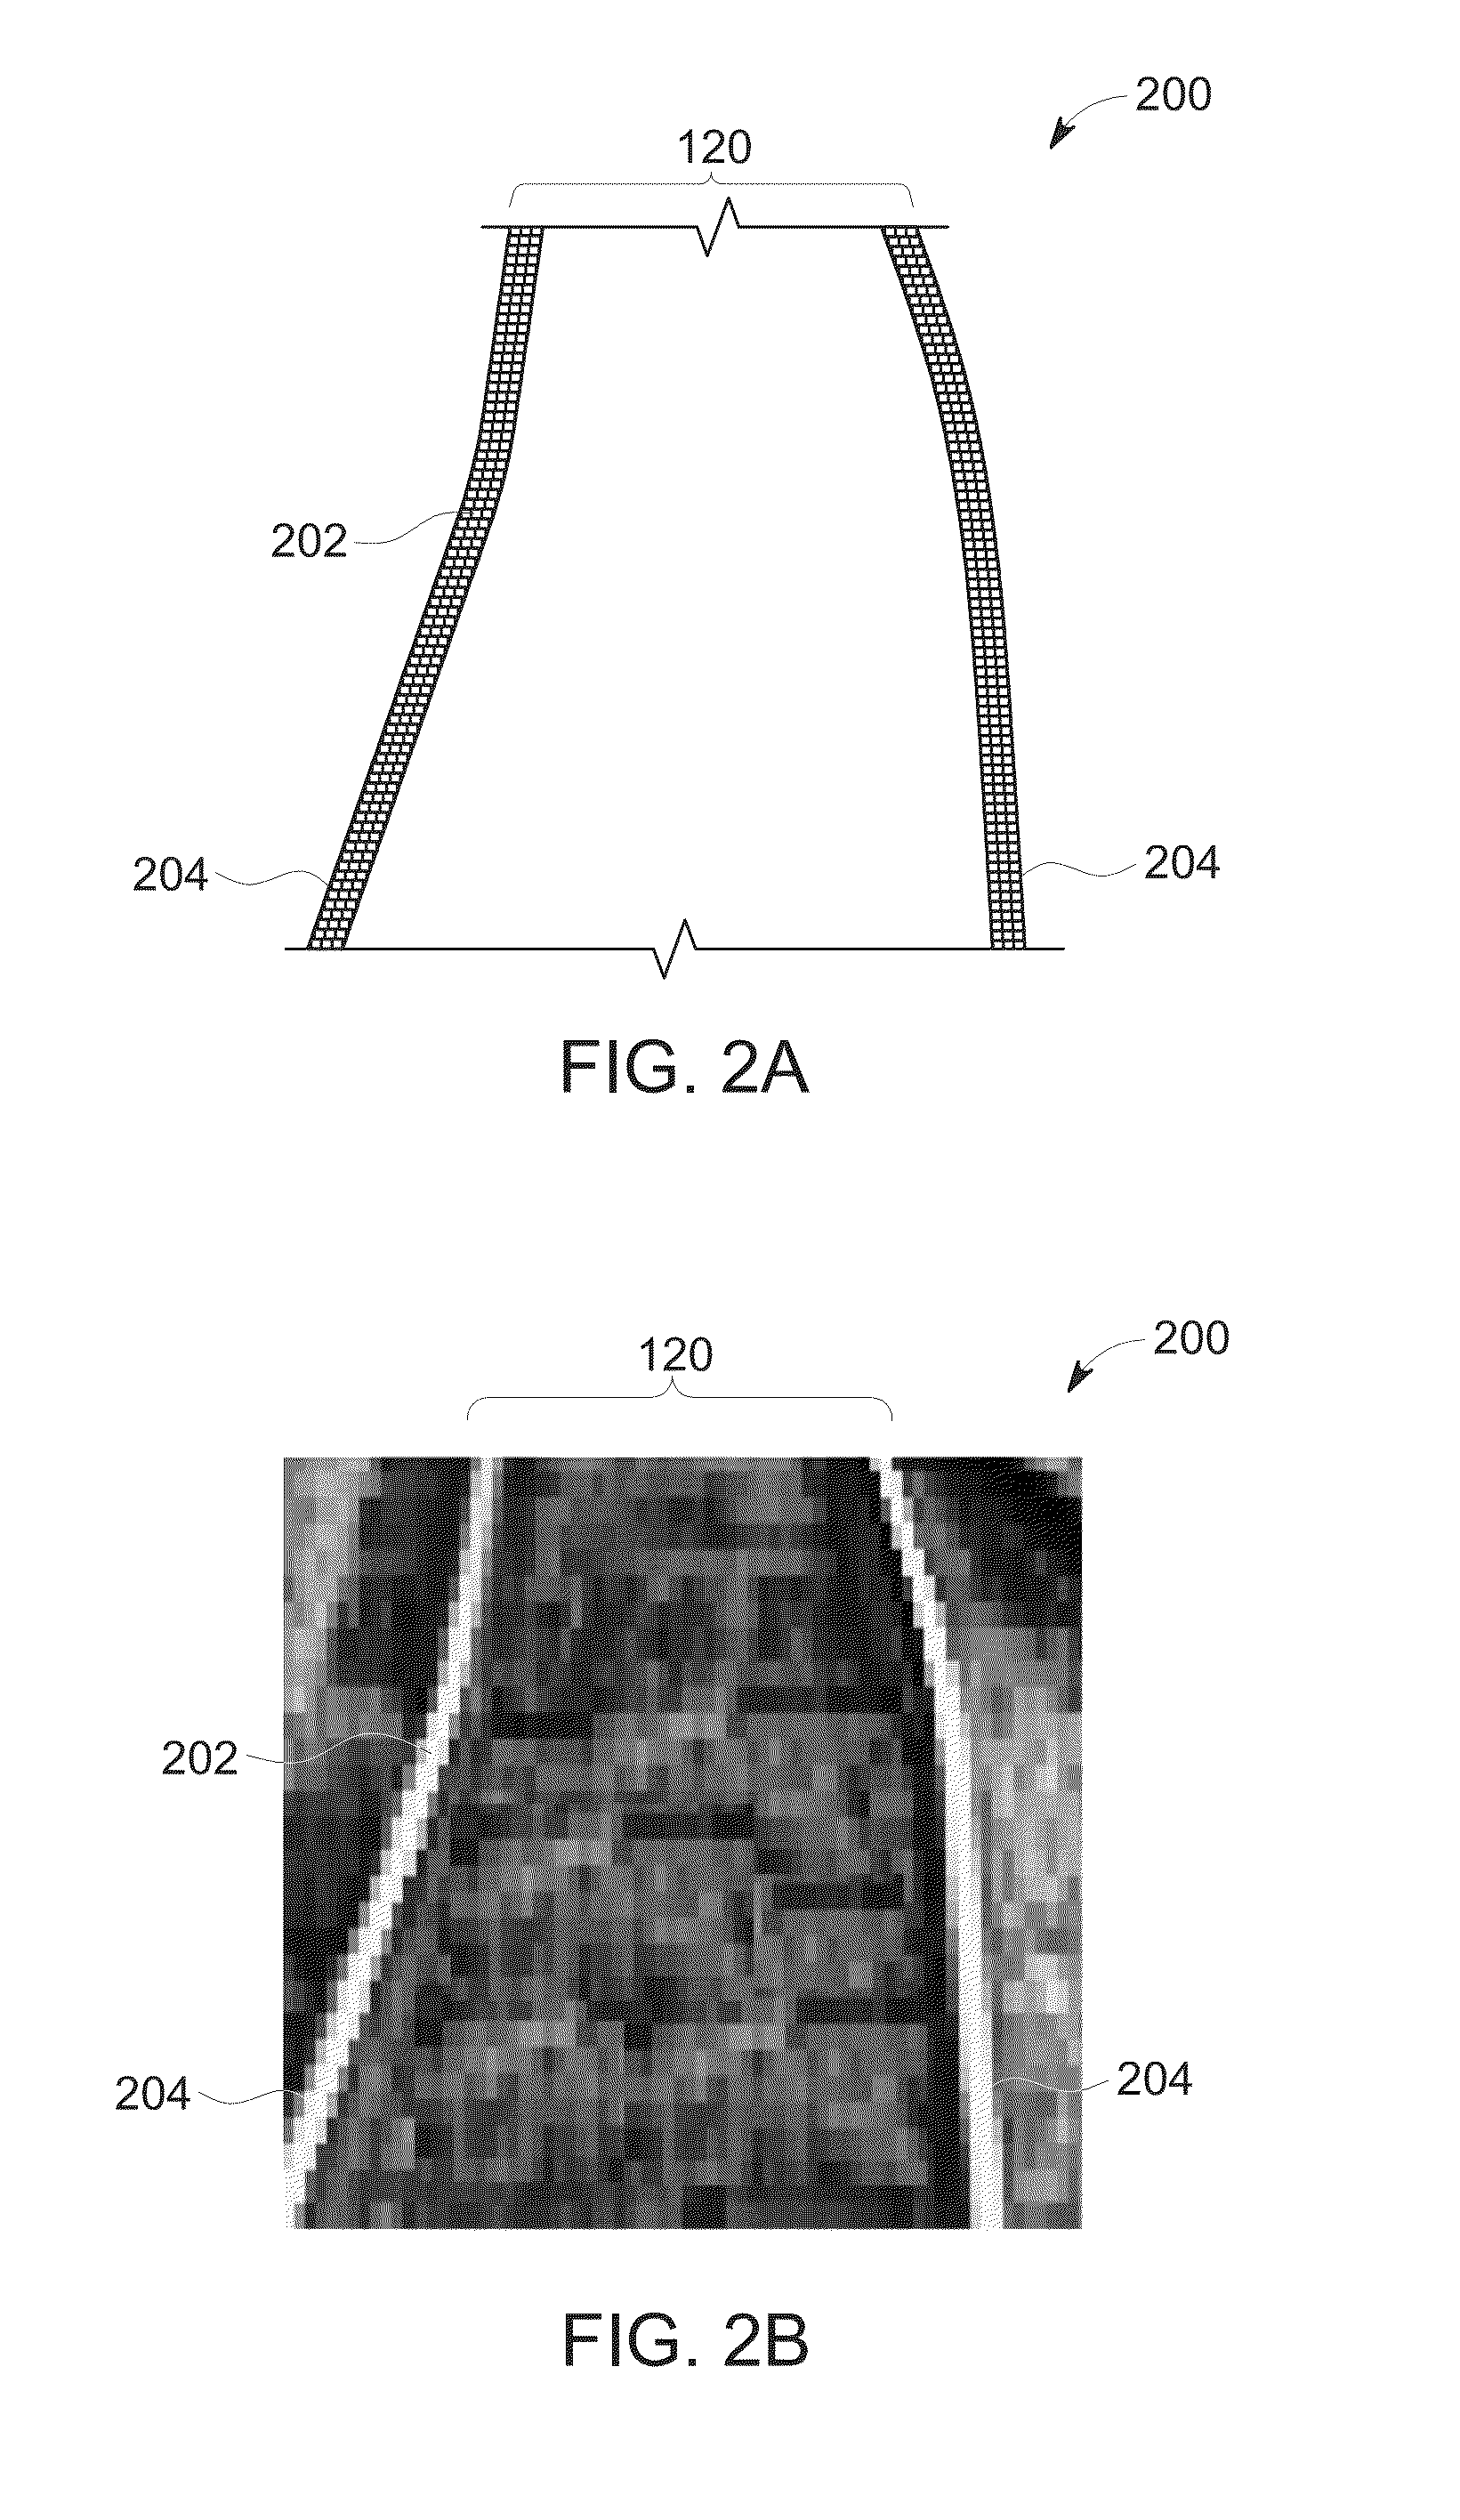 Optical route examination system and method